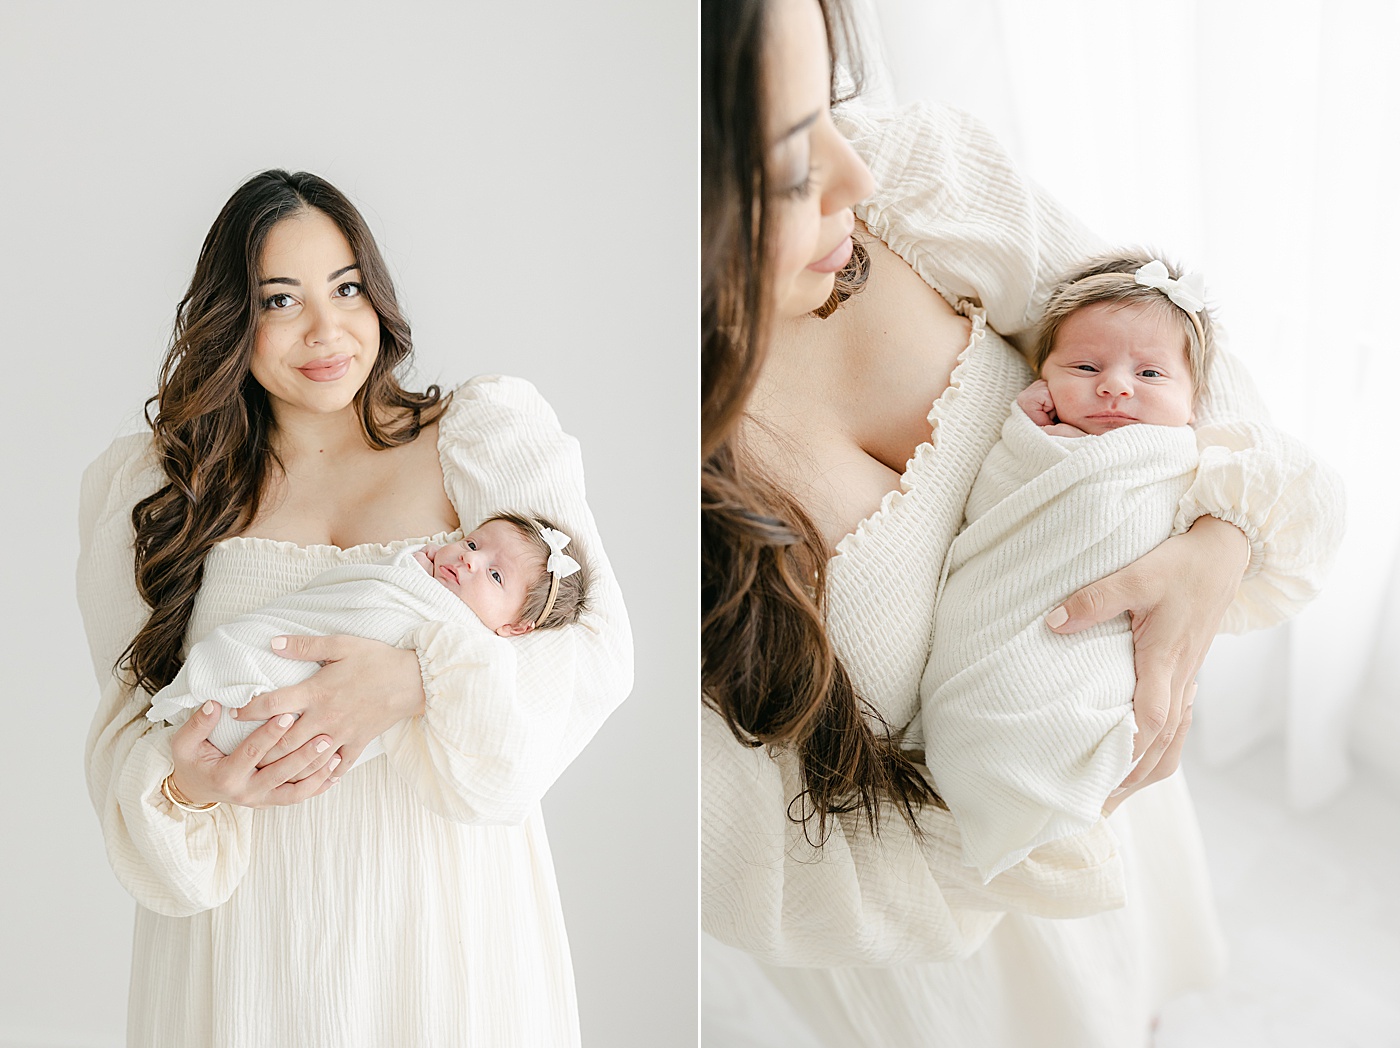 Mom holding her baby girl during newborn photoshoot with Kristin Wood Photography.